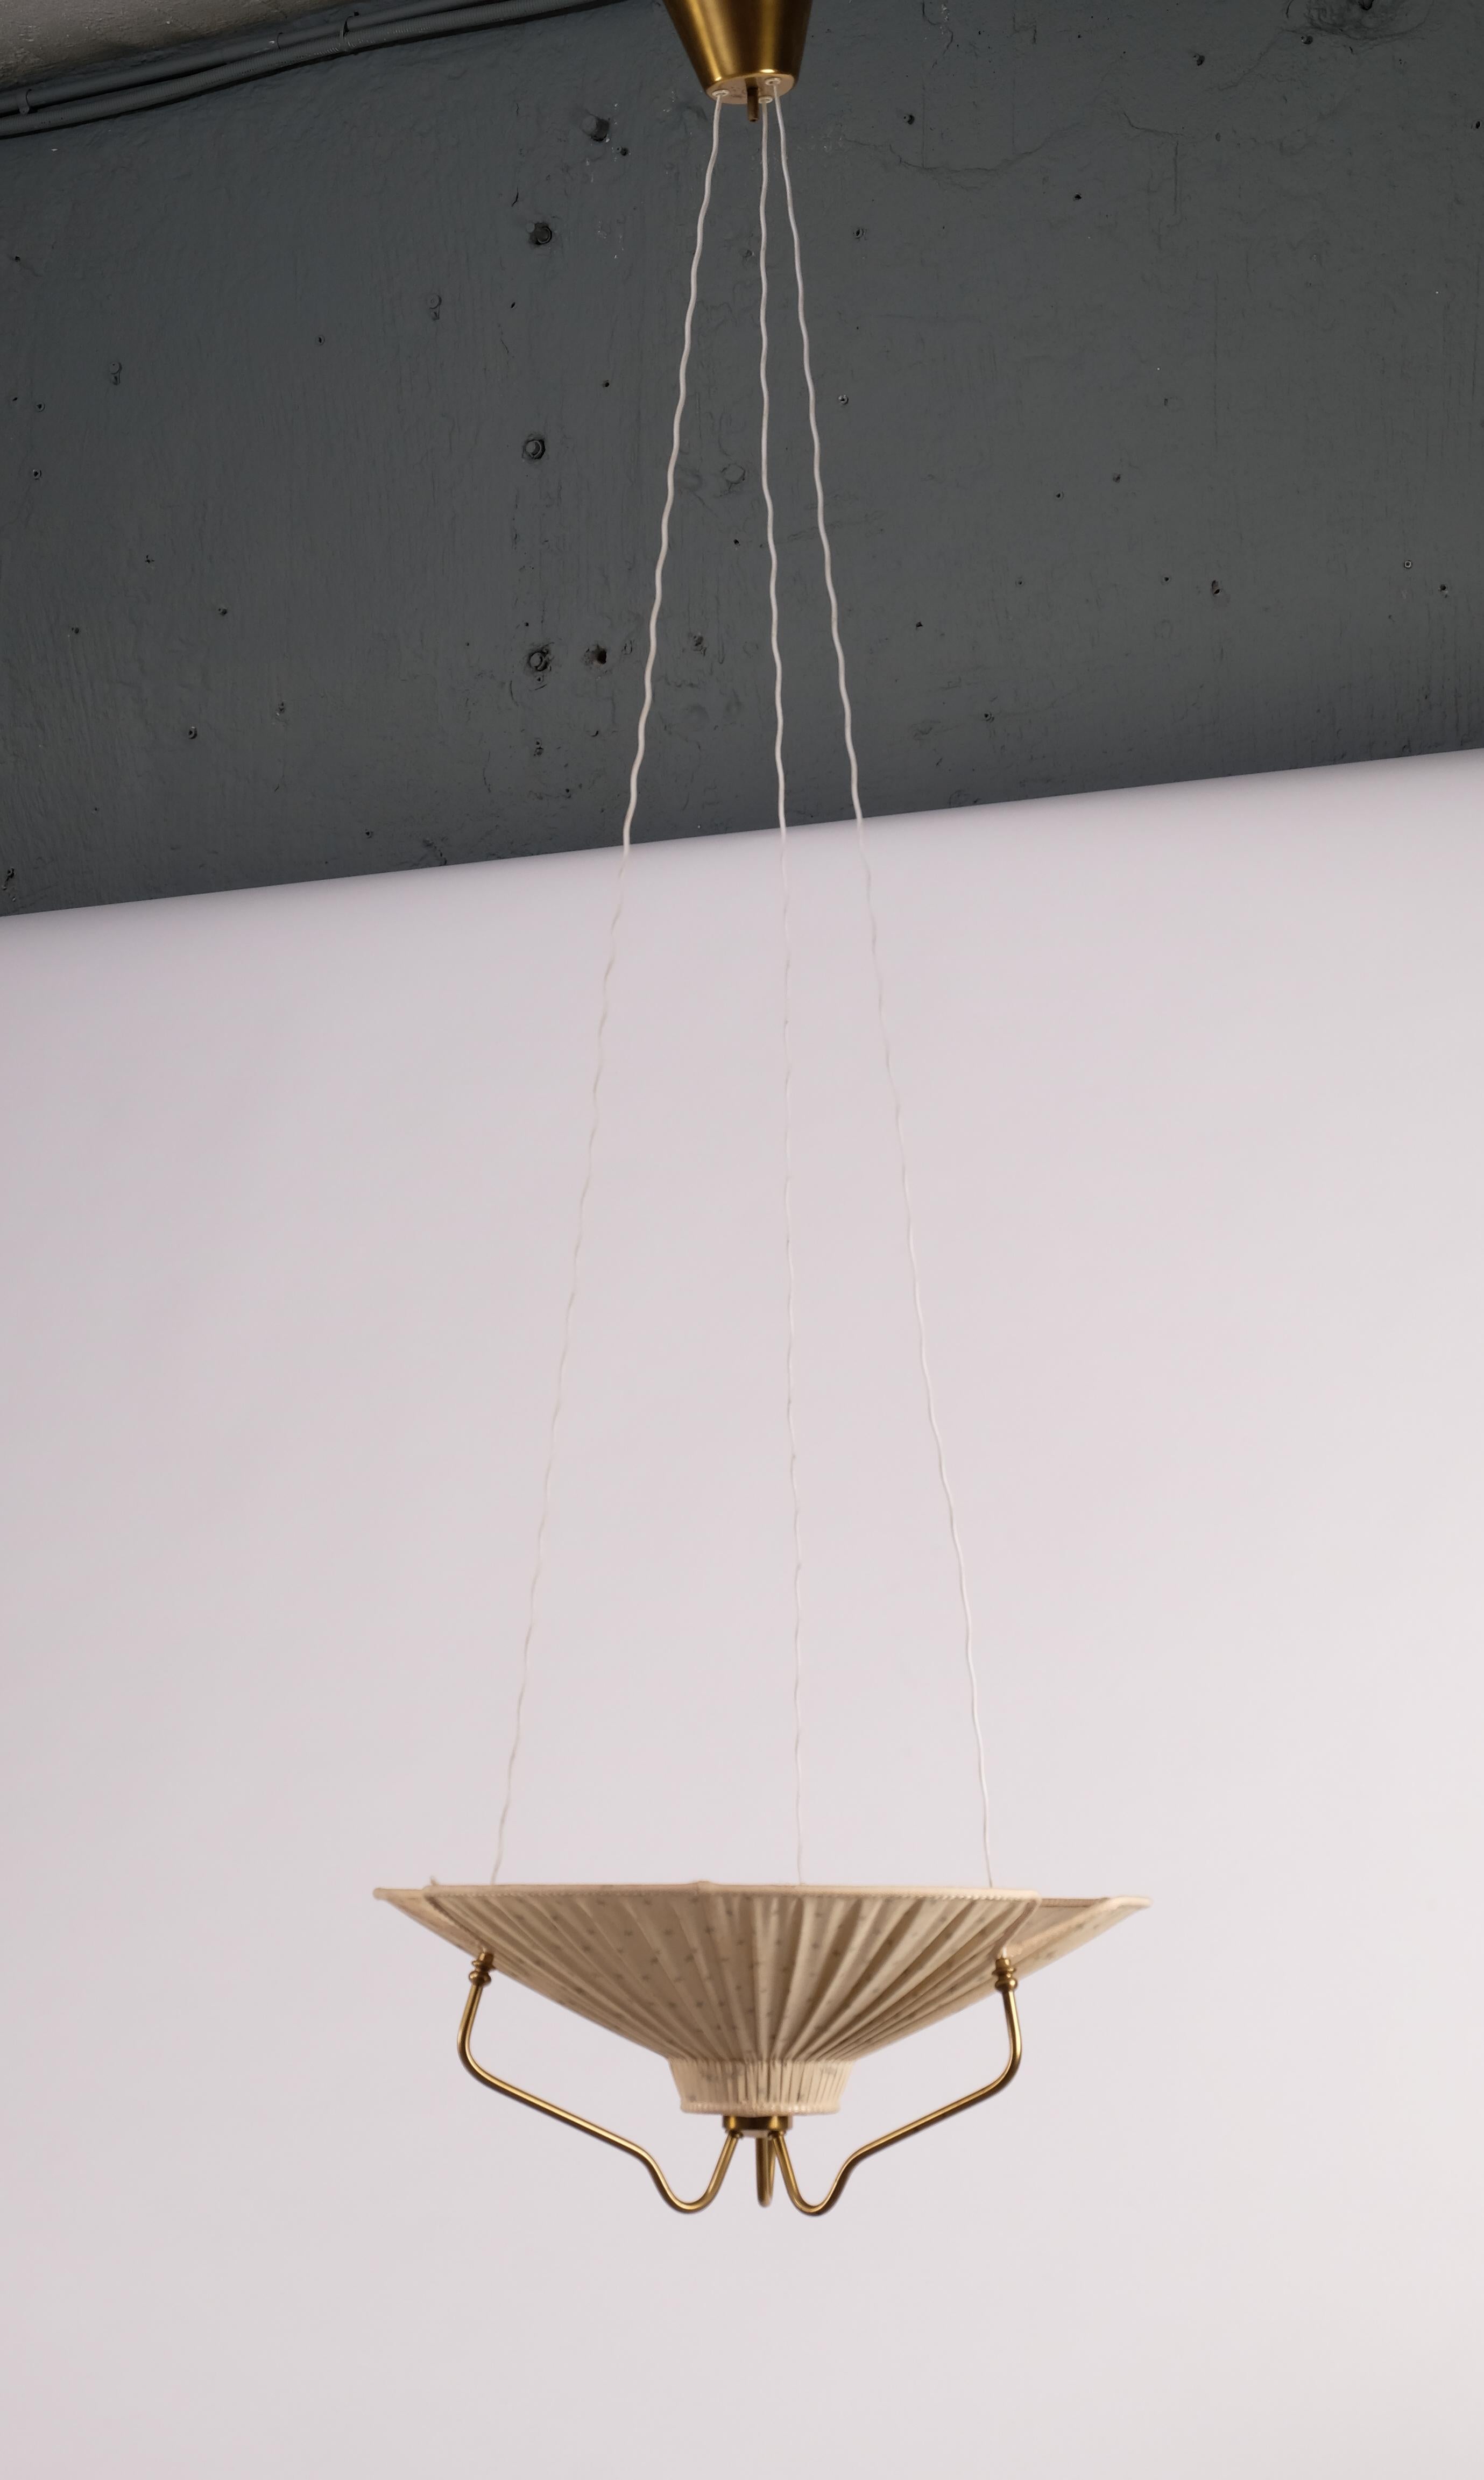 Made from brass with original fabric shade. Good vintage condition with few signs of wear and use.
Attributed to Einar Bäckström, Sweden, 1940s.
New wiring.